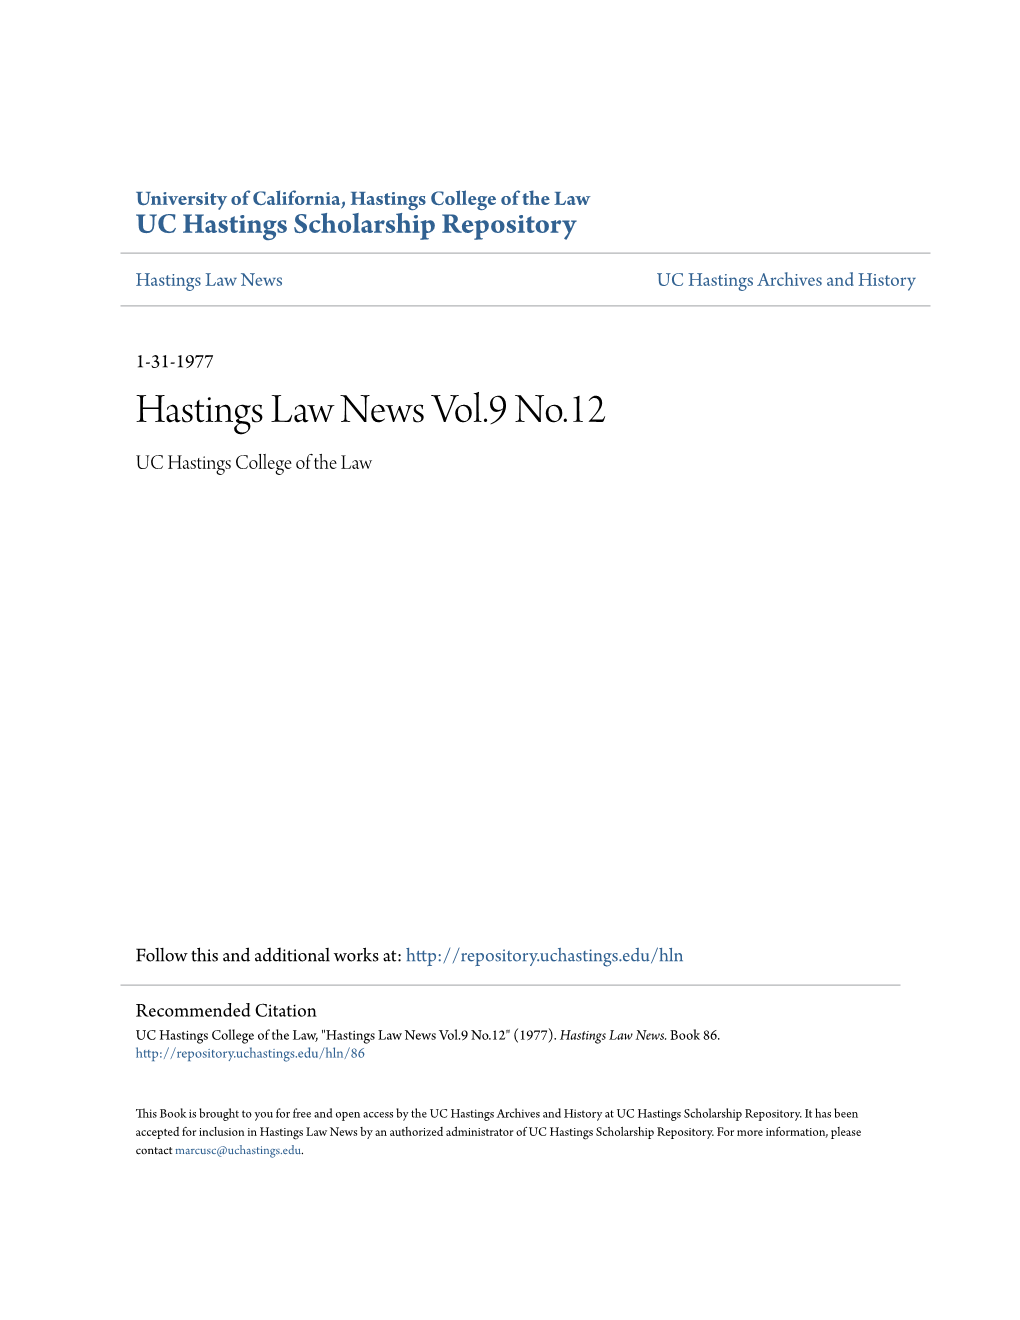 Hastings Law News Vol.9 No.12 UC Hastings College of the Law